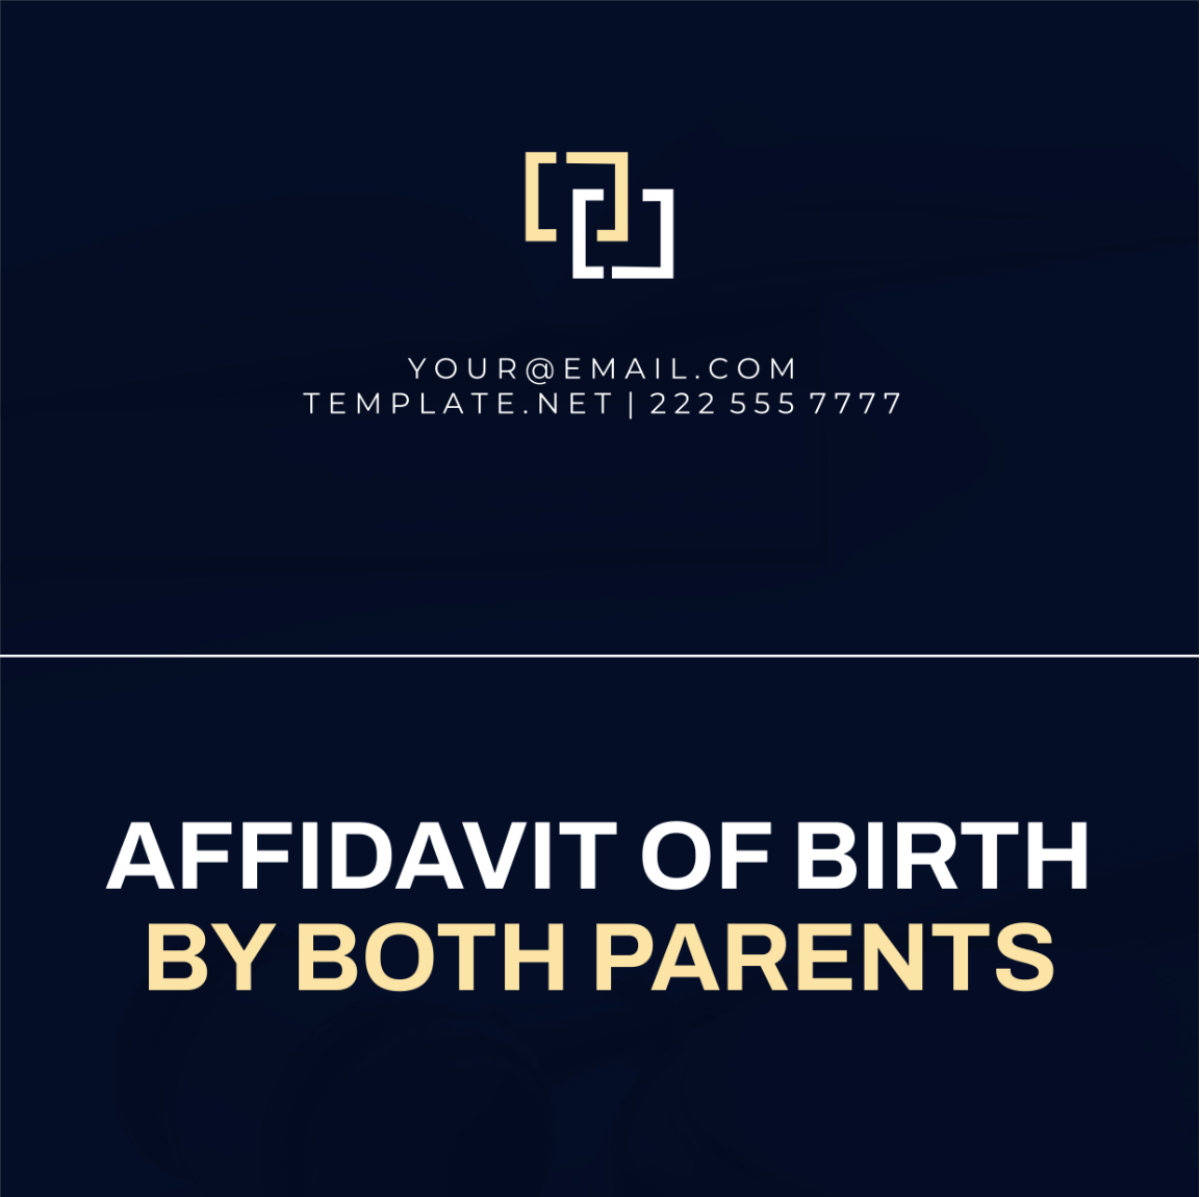 Affidavit of Birth by Both Parents Template